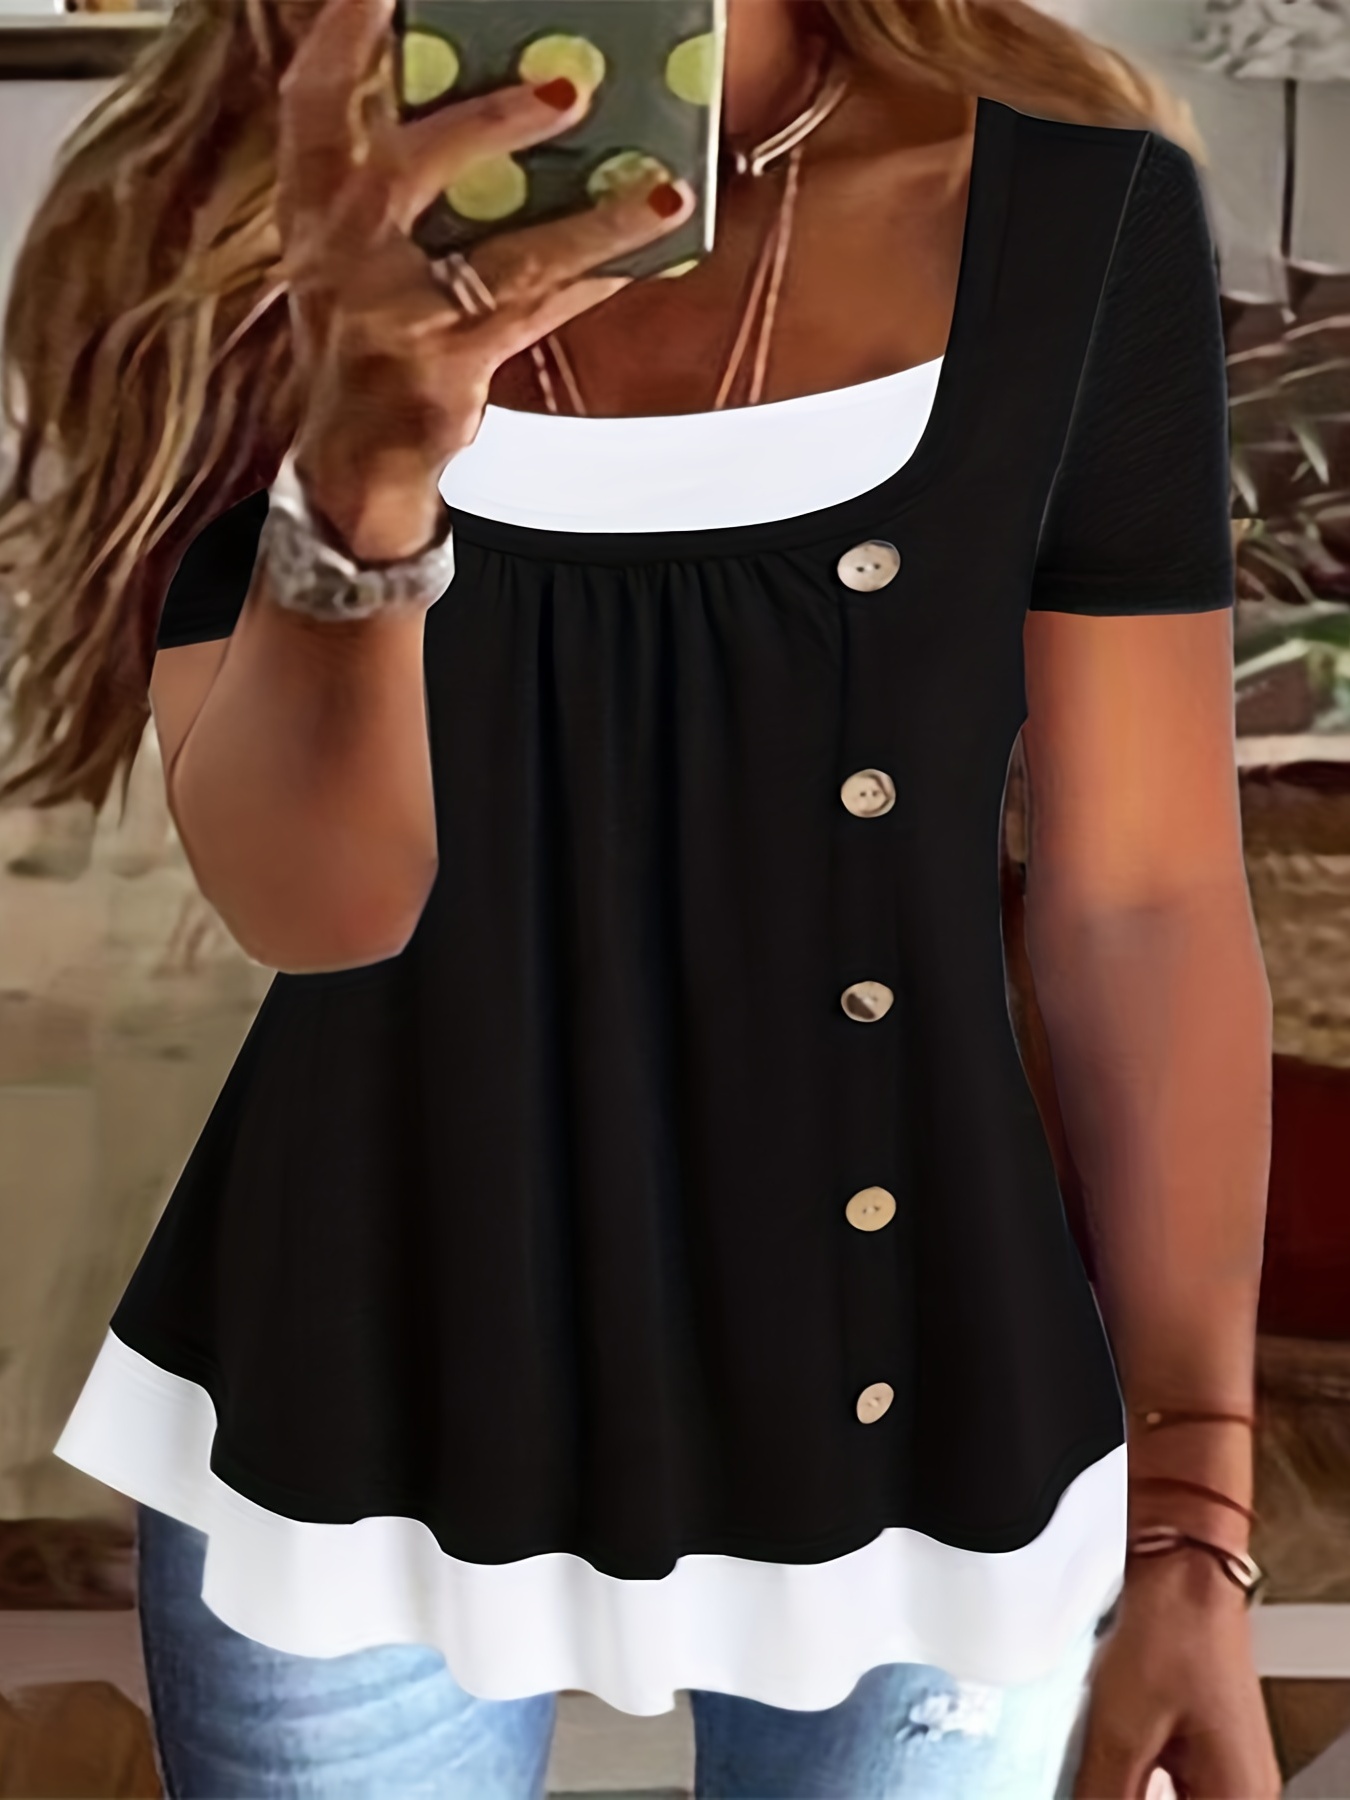 Plus Size Women's Sexy Lace Up Sleeveless Vest Tank Tops Summer Blouse T- Shirt